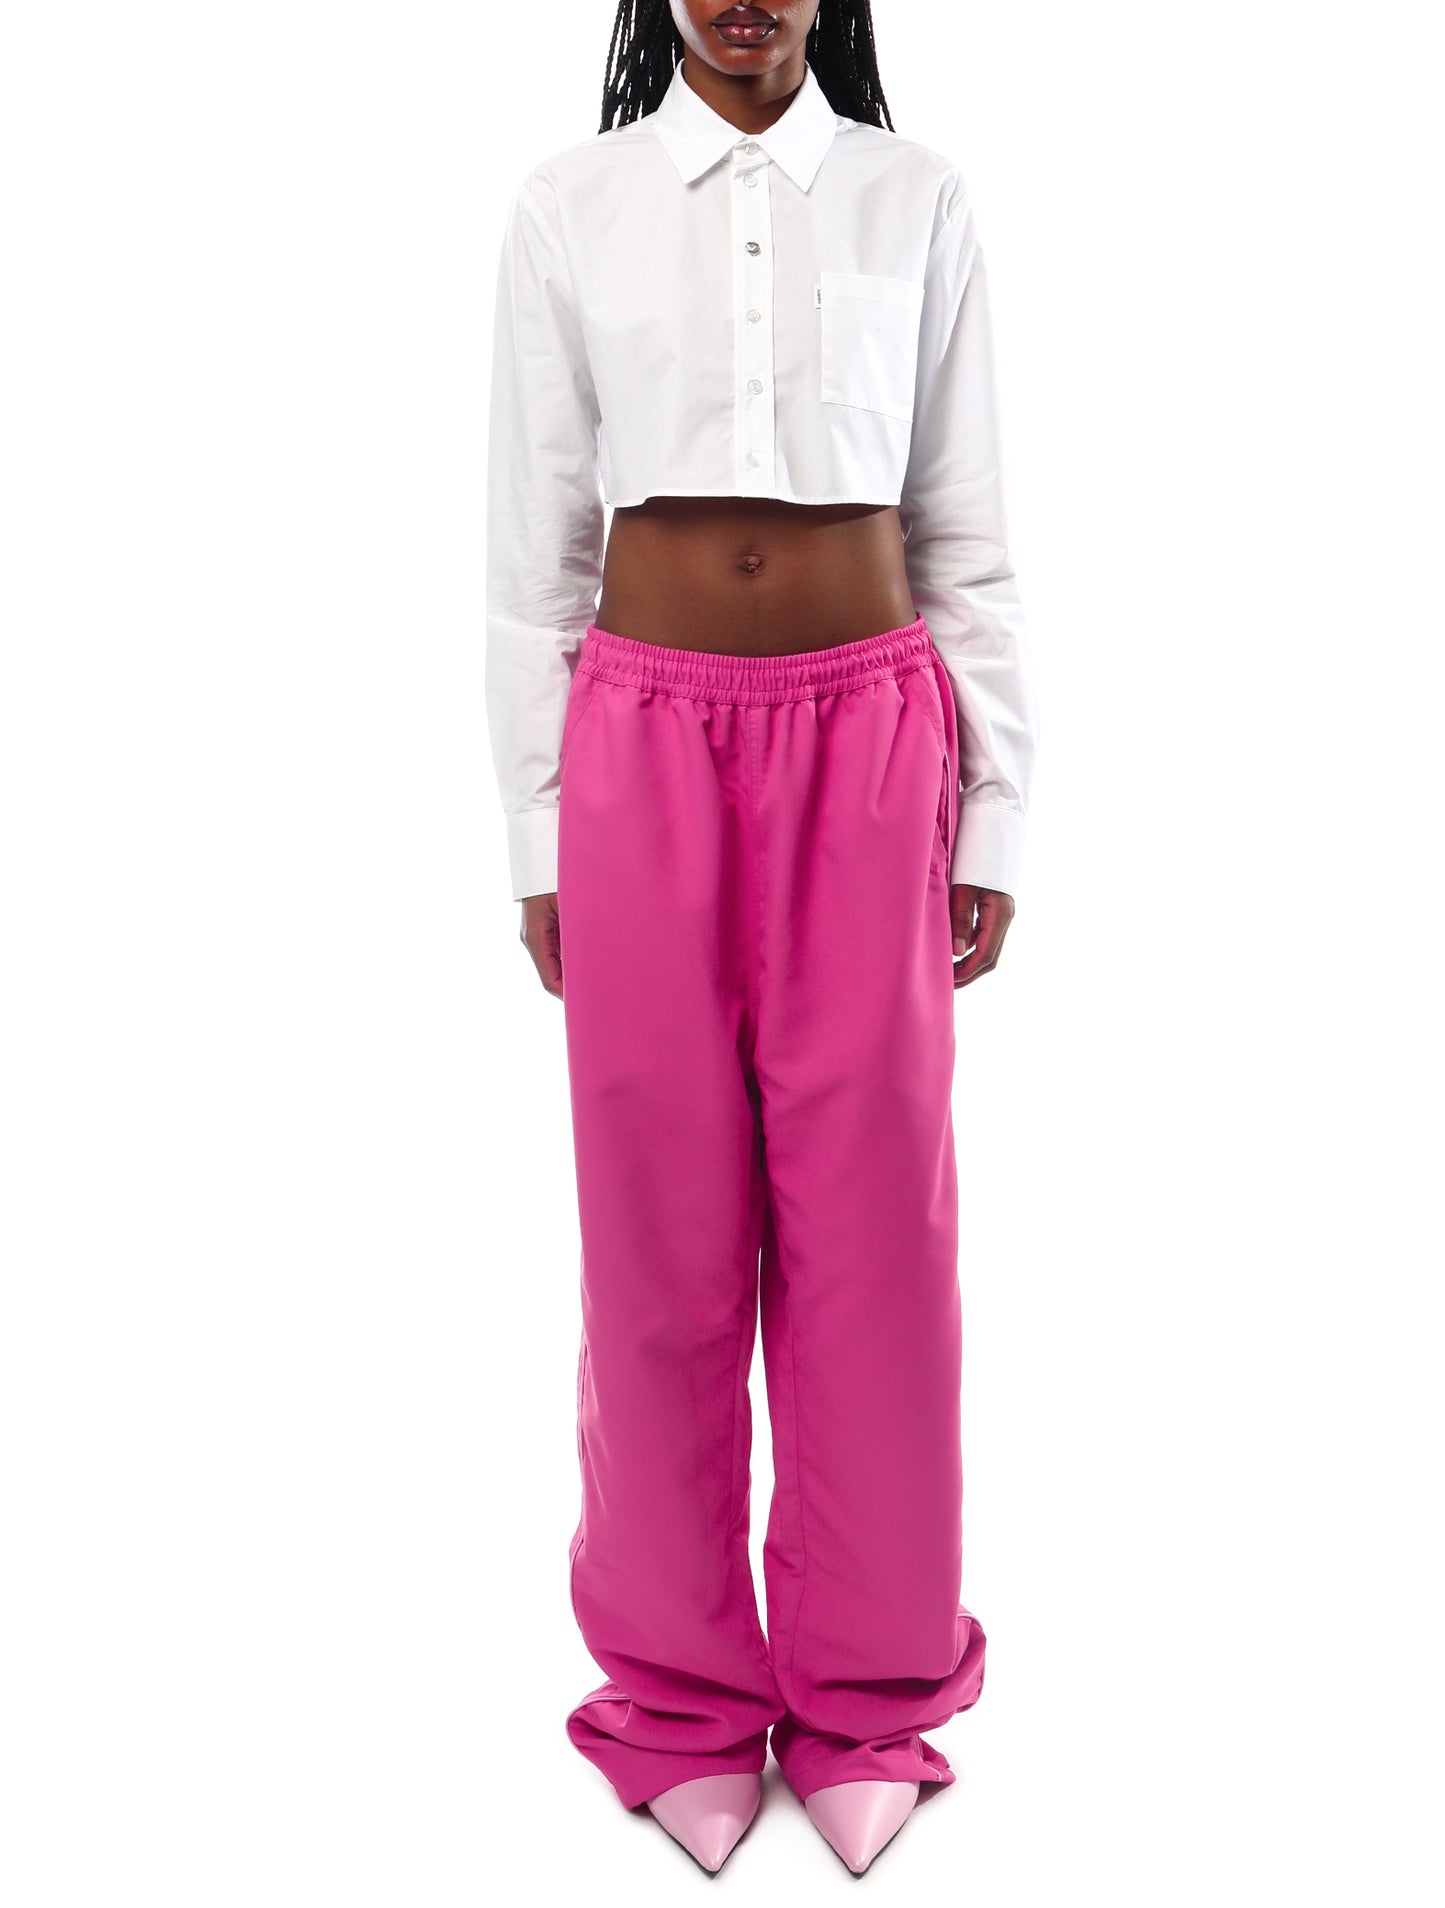 ABRA Hot Pink Chic Tracksuit Pants